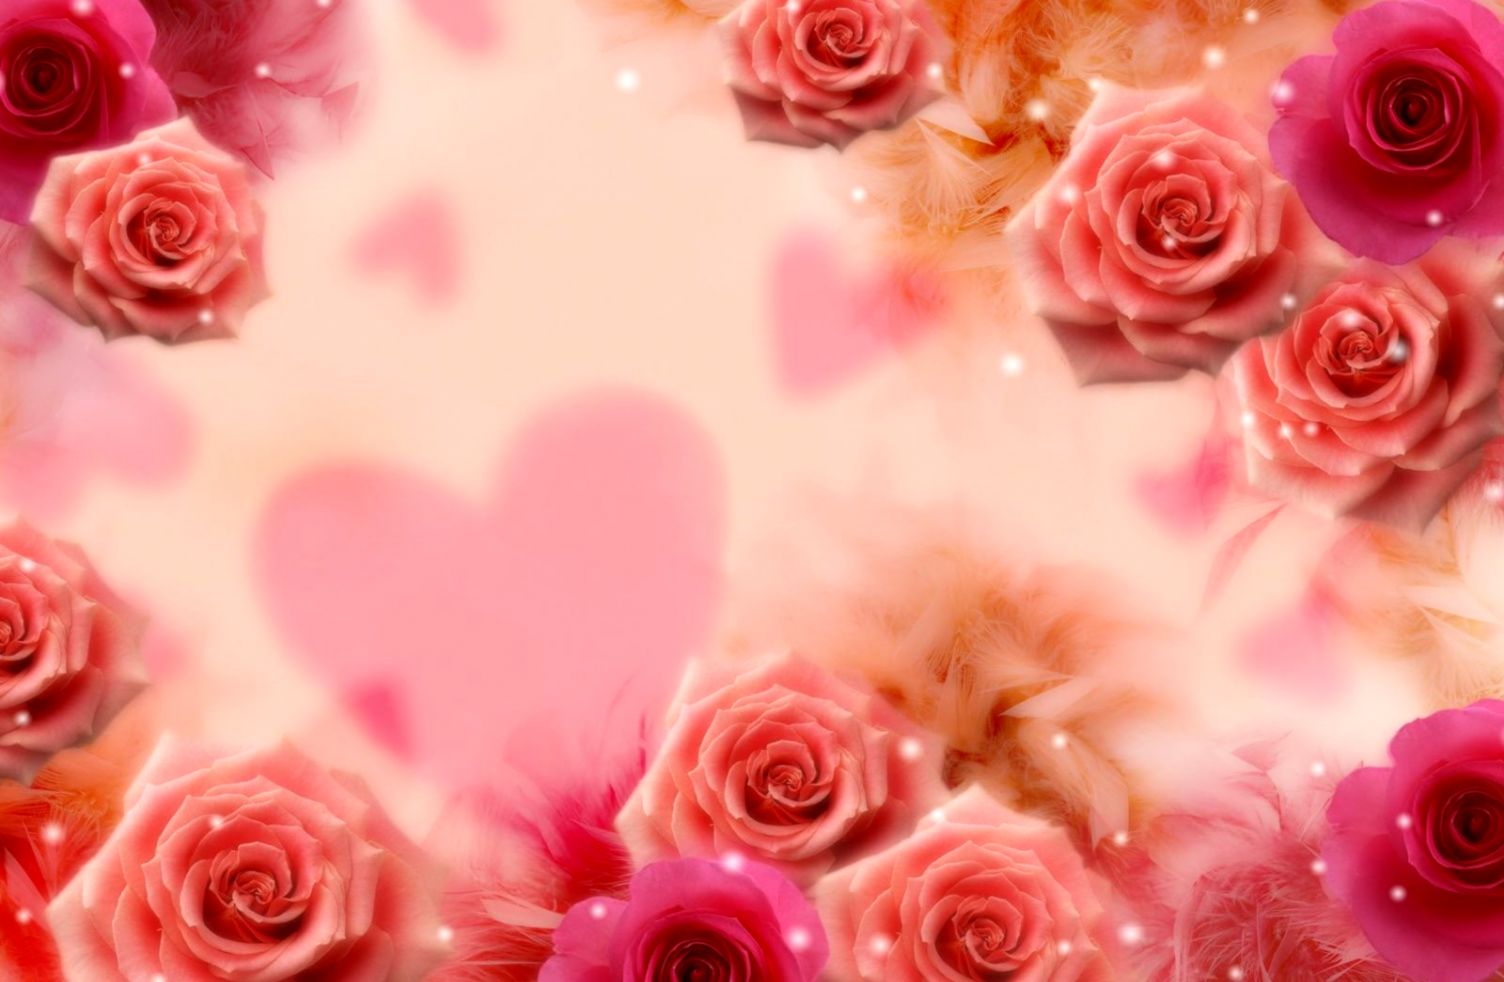 Flowers Simply Pink Love Roses Hearts Flowers Nature - Hd Love Flowers Name - HD Wallpaper 